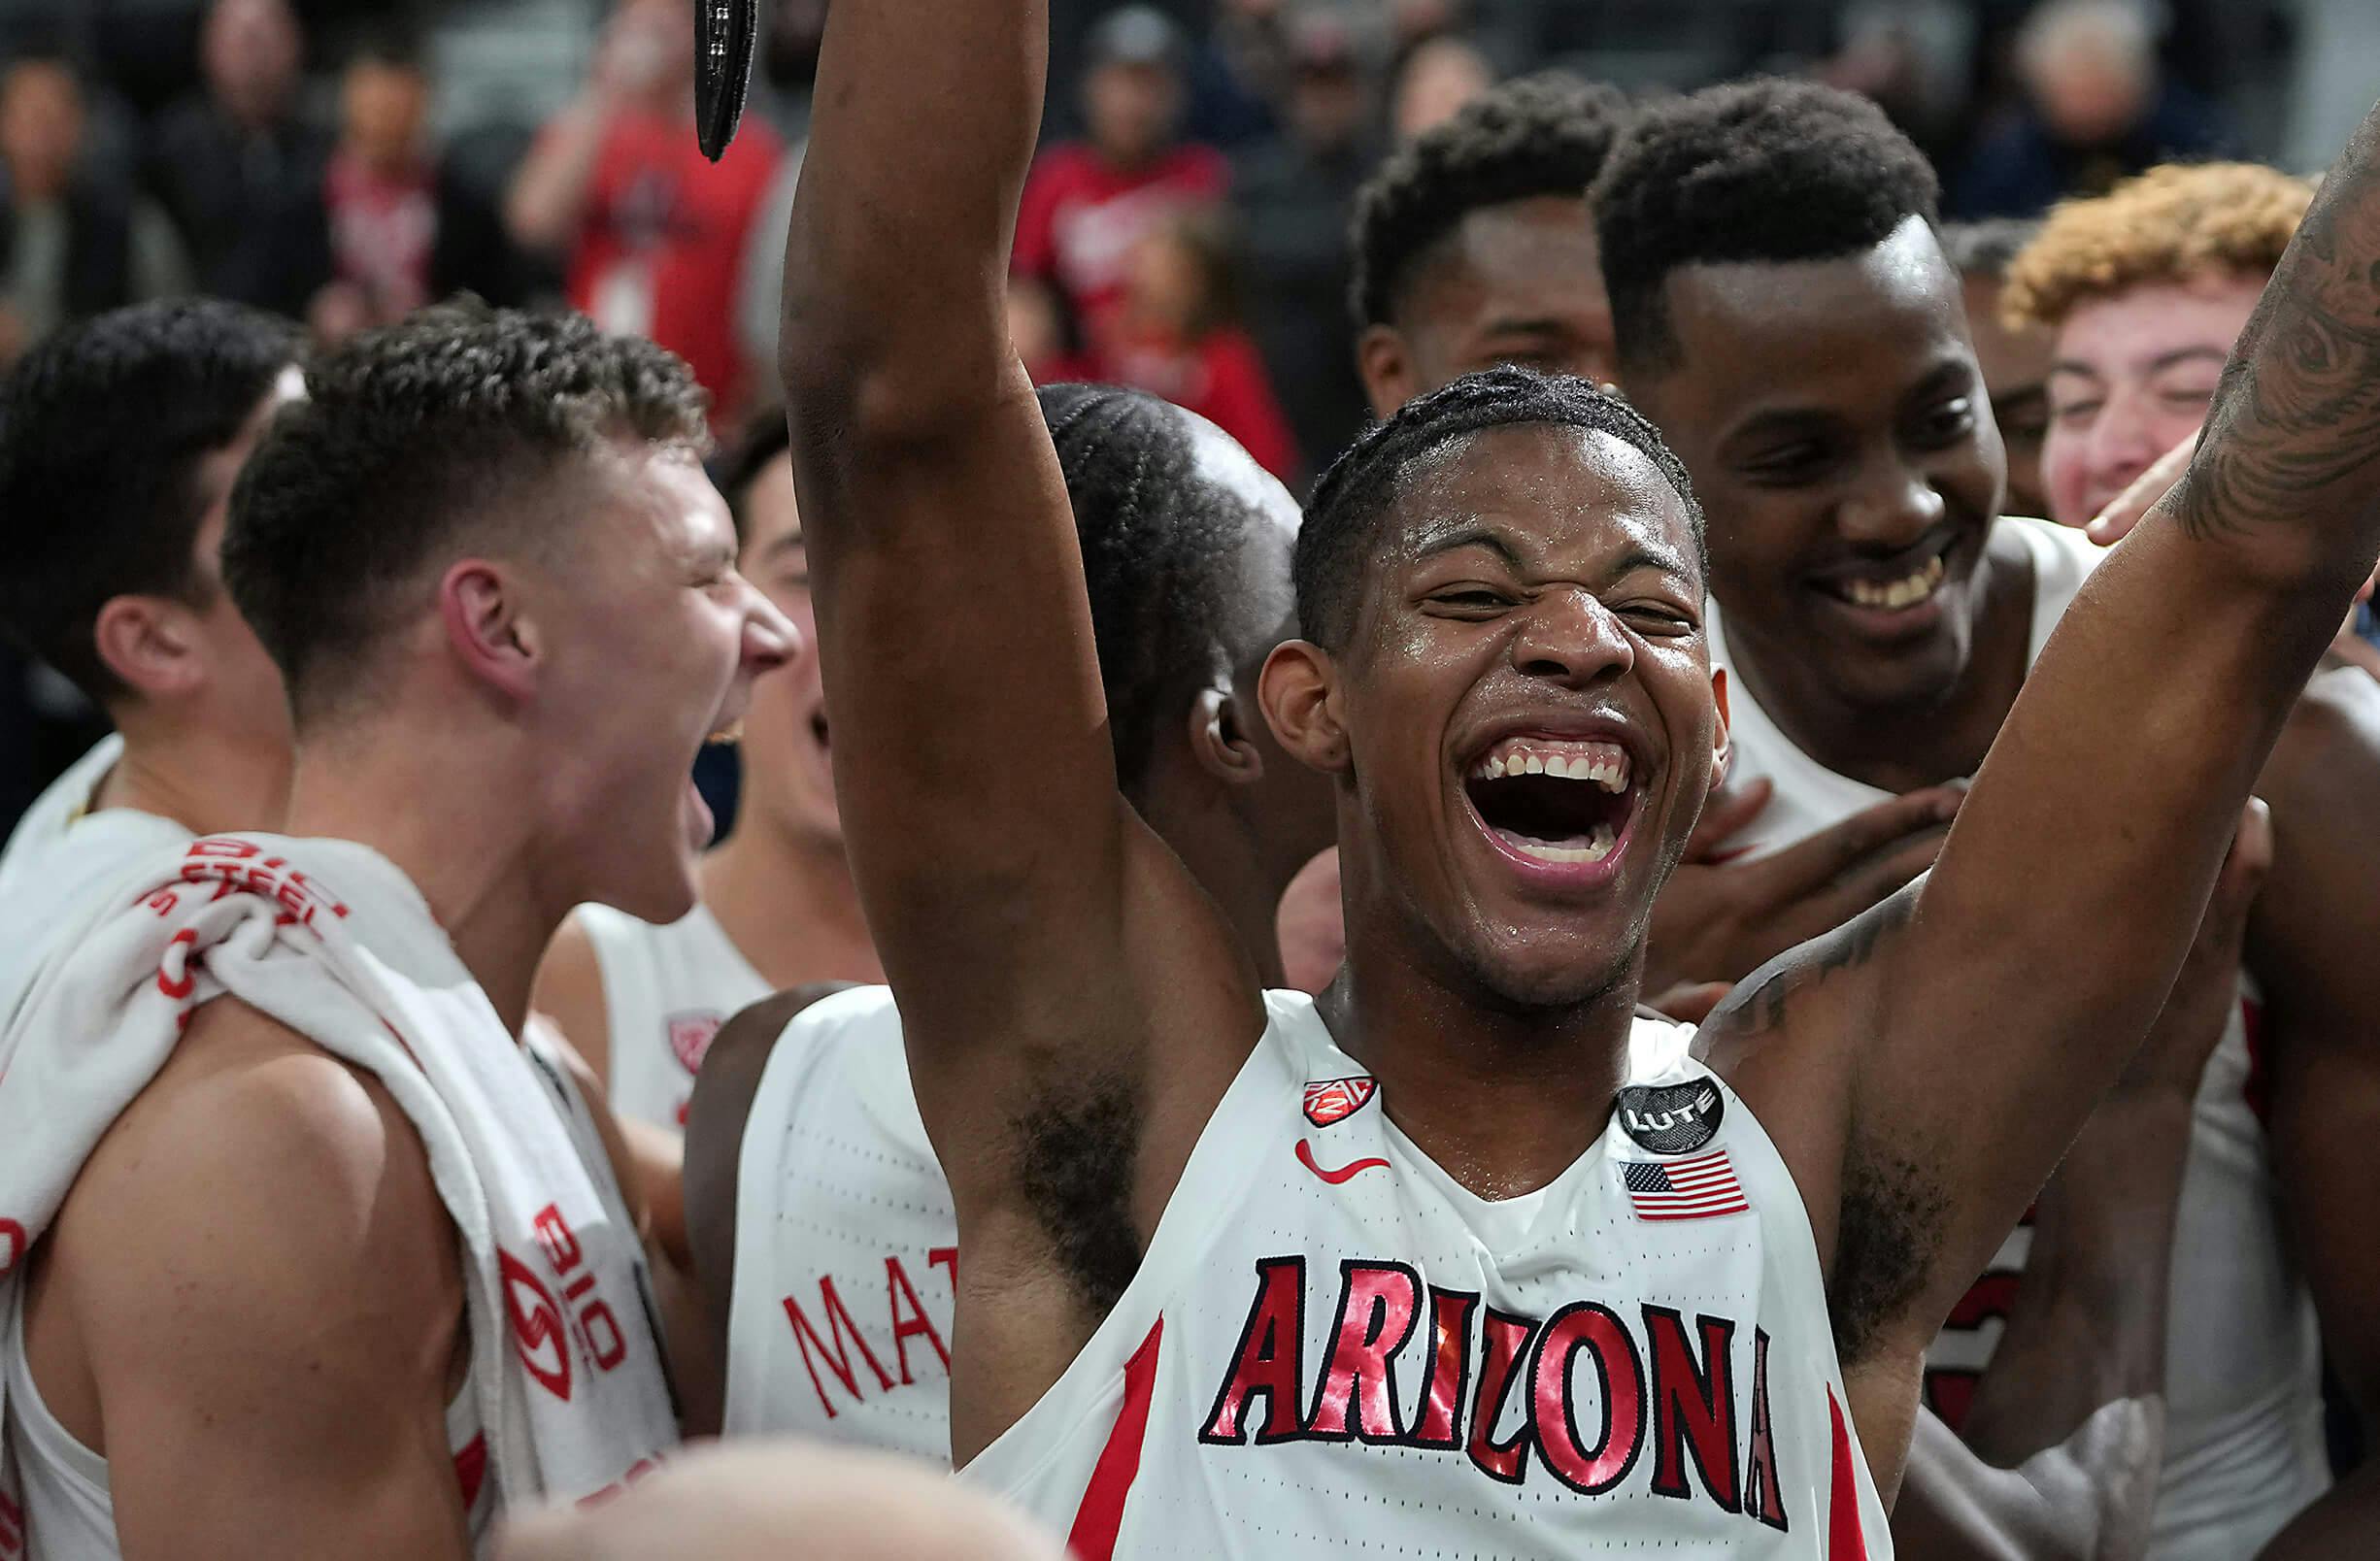 Arizona Wildcats guard Dalen Terry (4) celebrates with his team mates after defeating the Michigan Wolverines 80-62 to win the Roman Main Event Championship game at T-Mobile Arena.